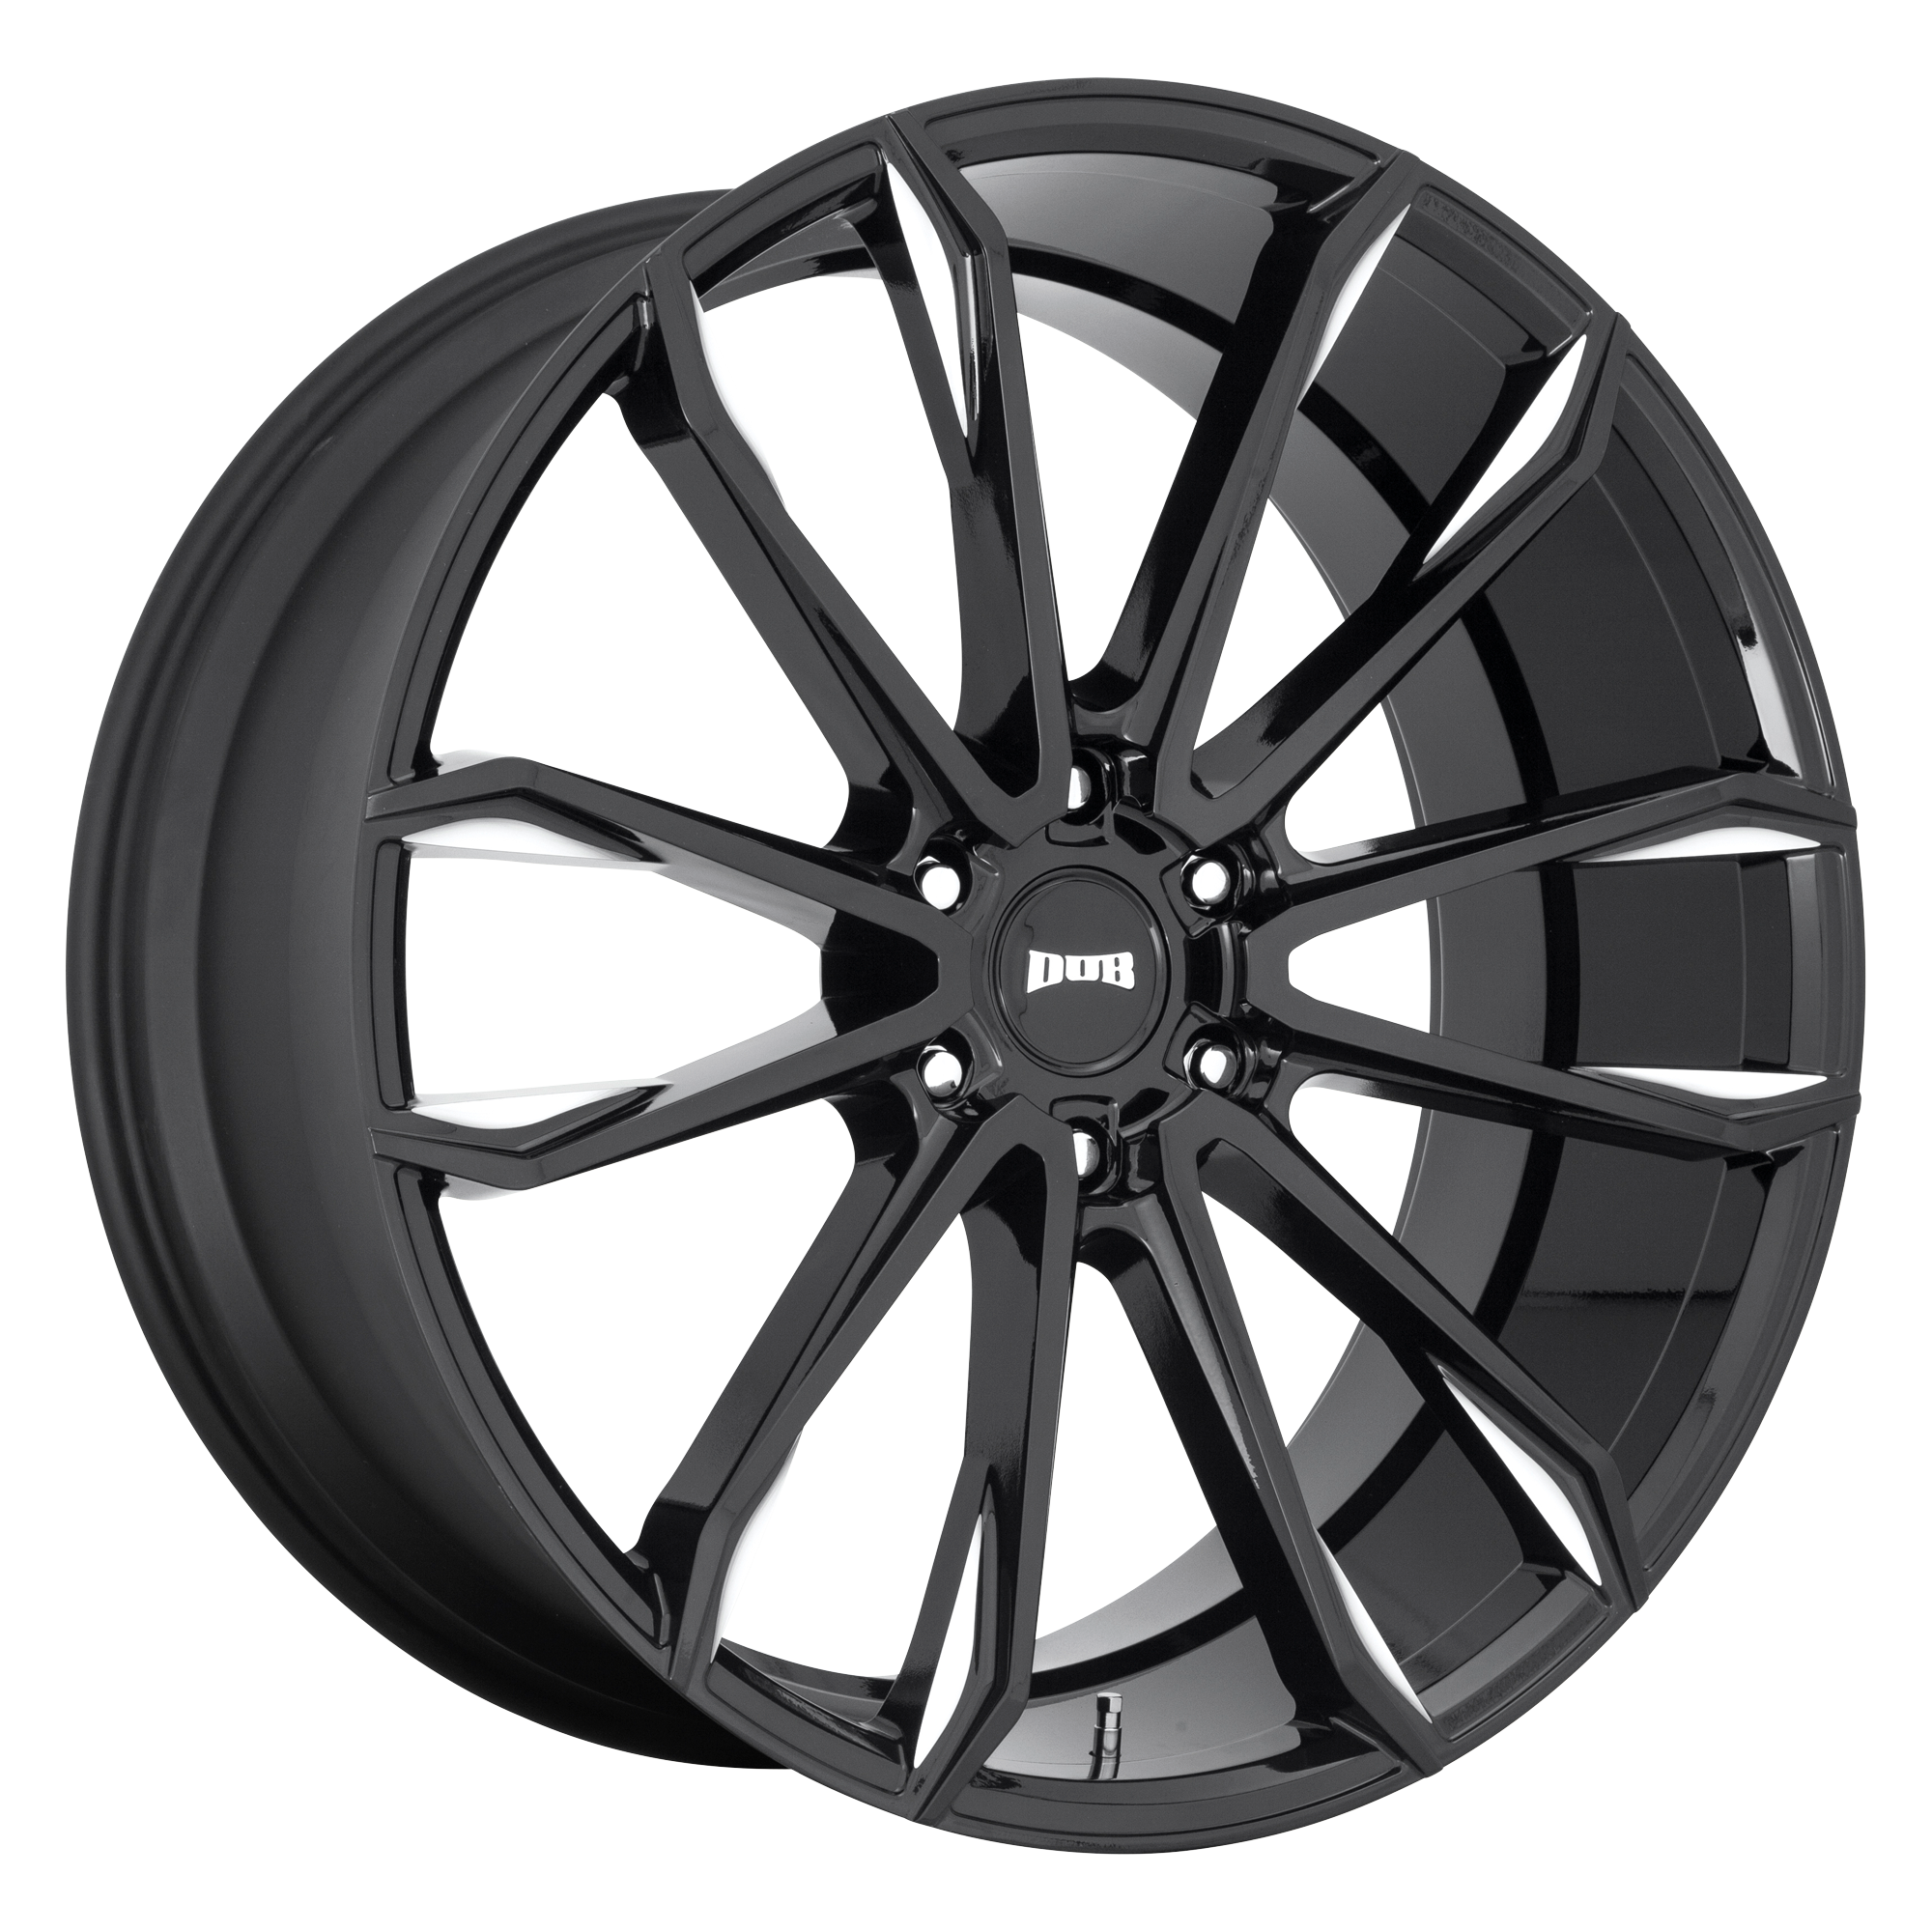 CLOUT 24x10 6x135.00 GLOSS BLACK MILLED (30 mm) - Tires and Engine Performance